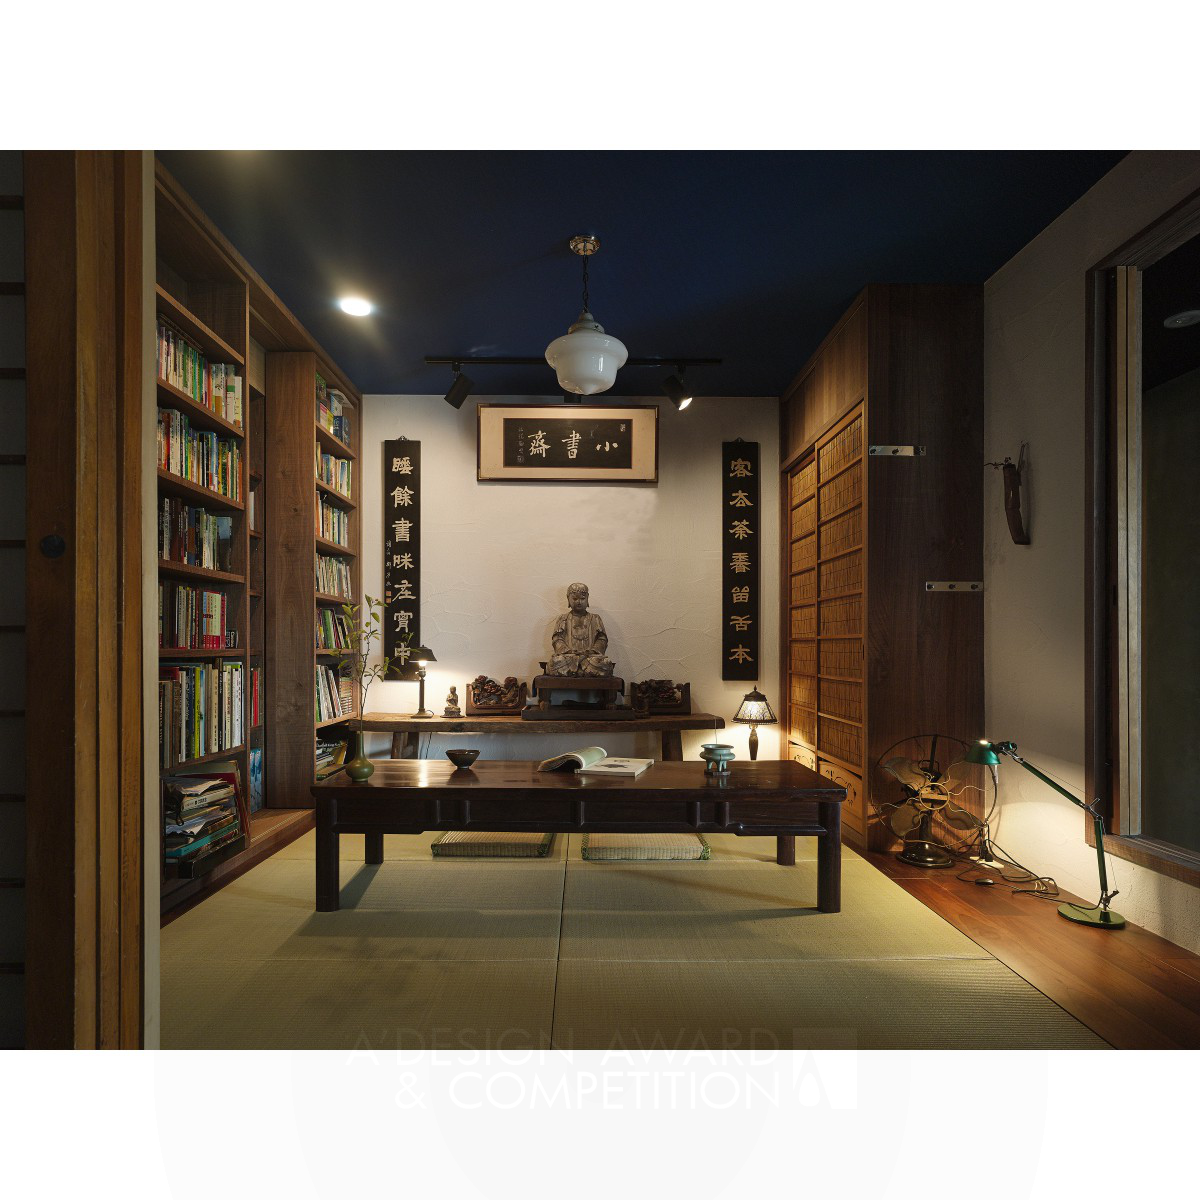 Simplicity and Zen Residence by Wen Jenq Cherng